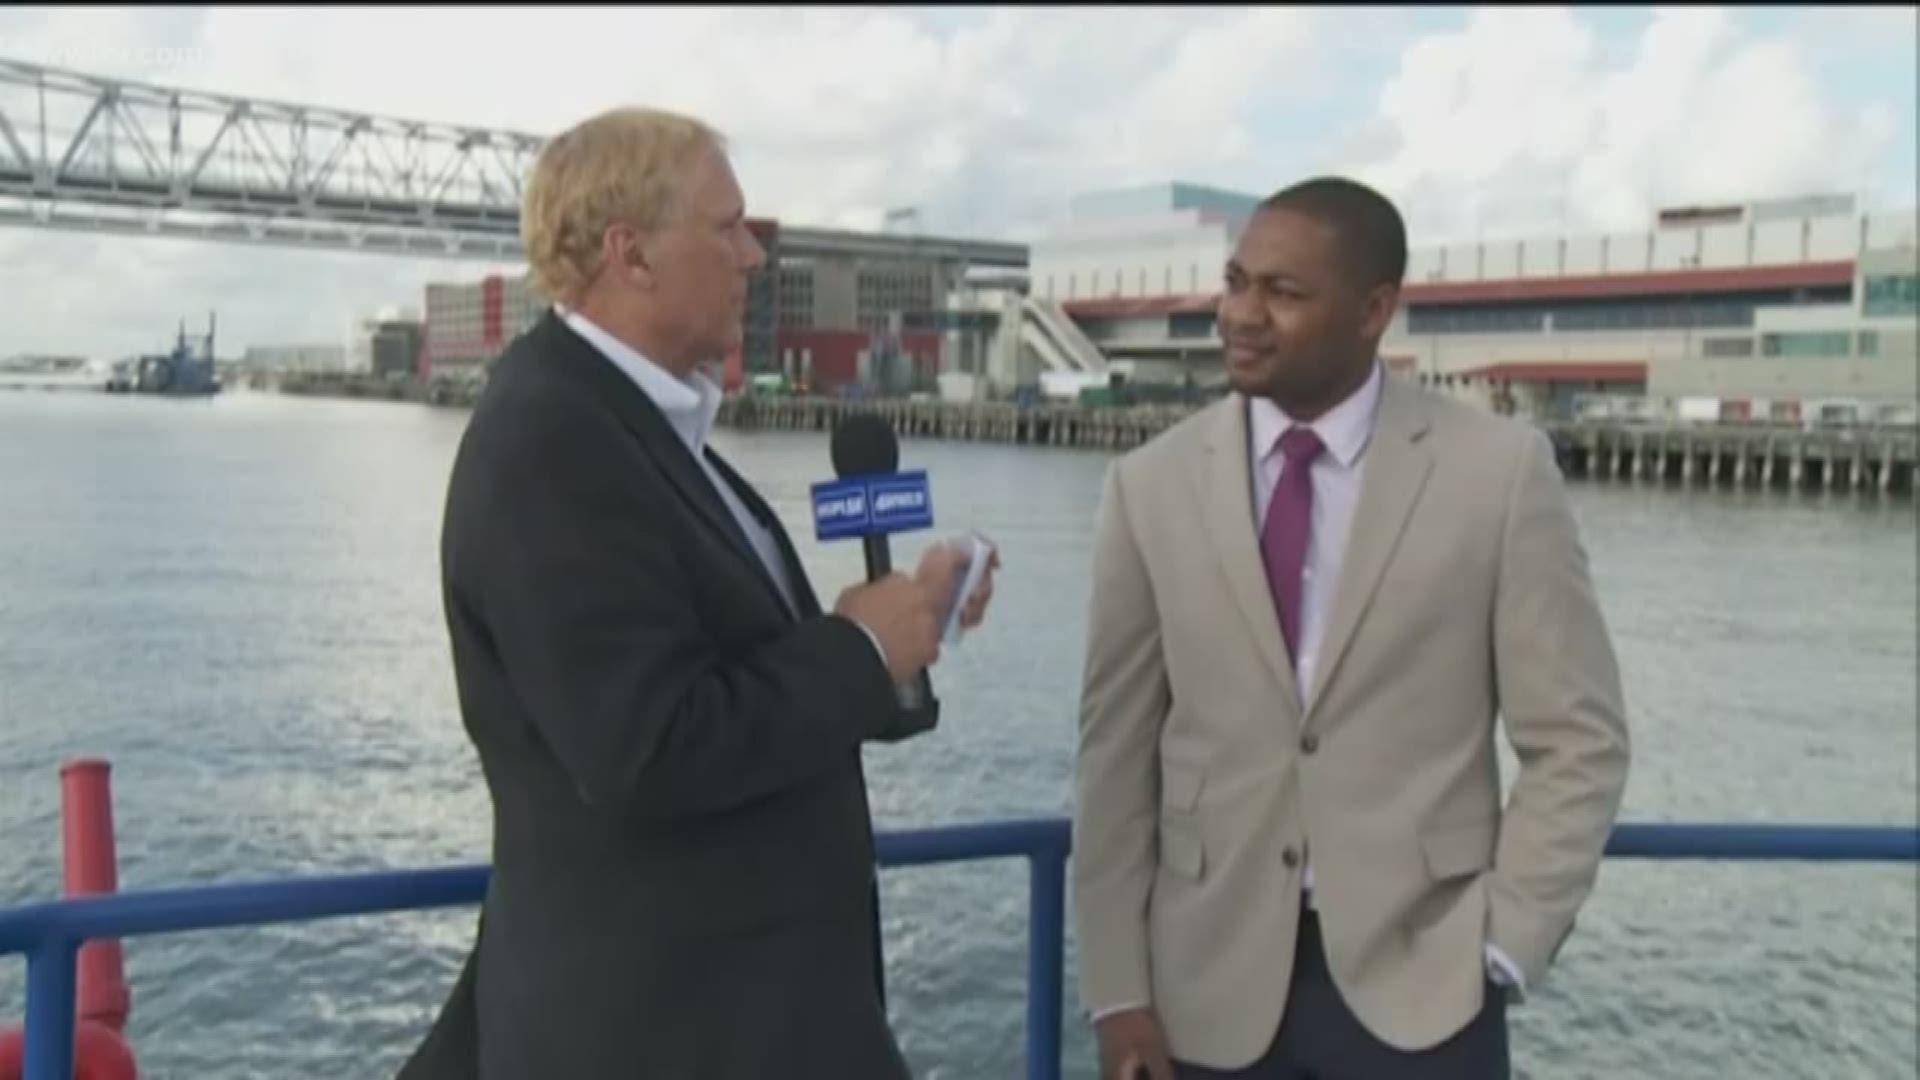 In honor of National Maritime Day, Eric Paulsen spoke to Donnell Jackson about the future of the Port of New Orleans.